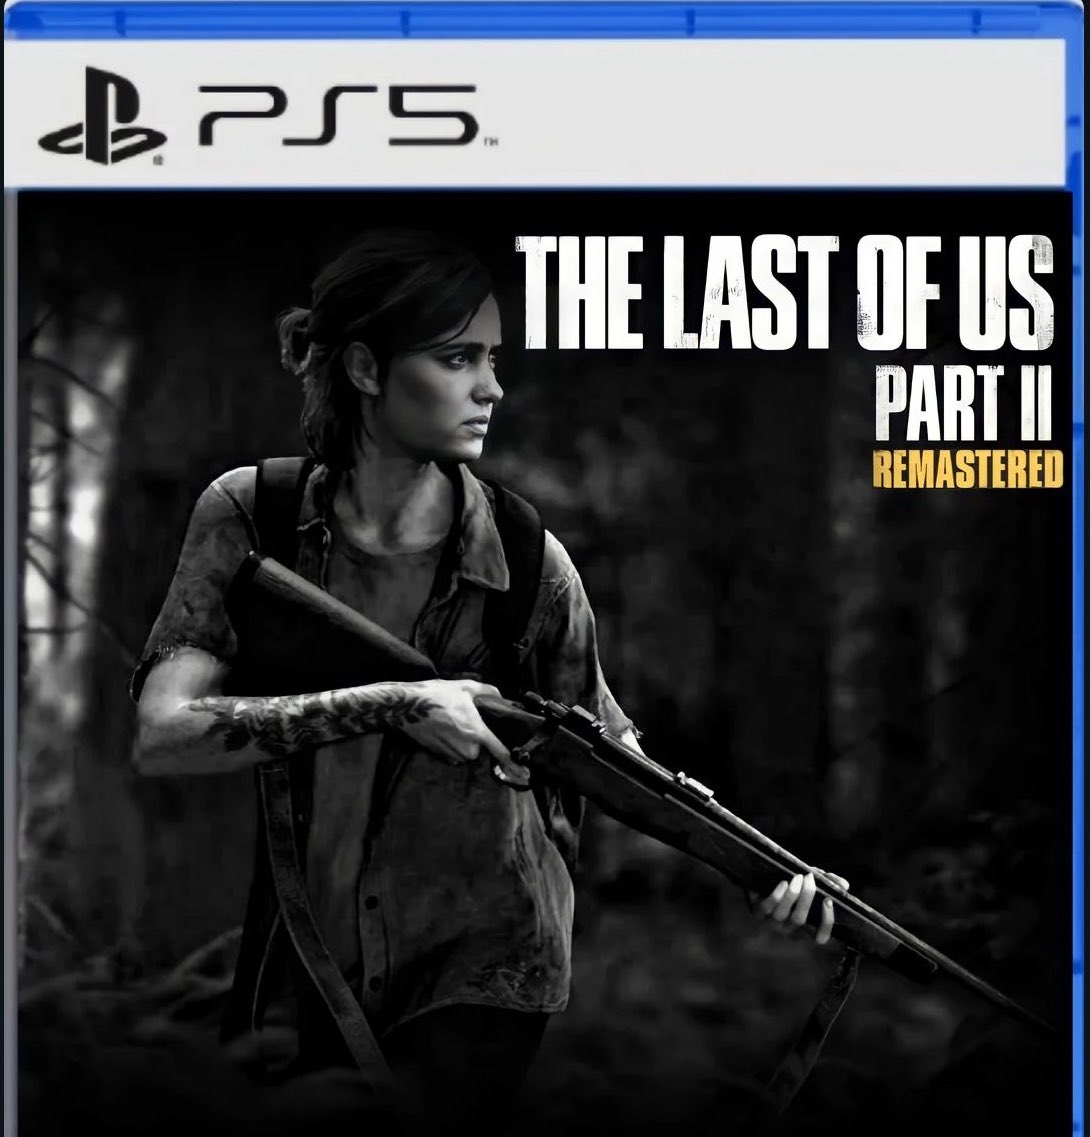 Joe Miller on X: Breaking: The Last of Us: Part 2 Remastered has basically  been confirmed for #PS5 by one of Naughty Dog's employees. Are you hyped?  👀  / X